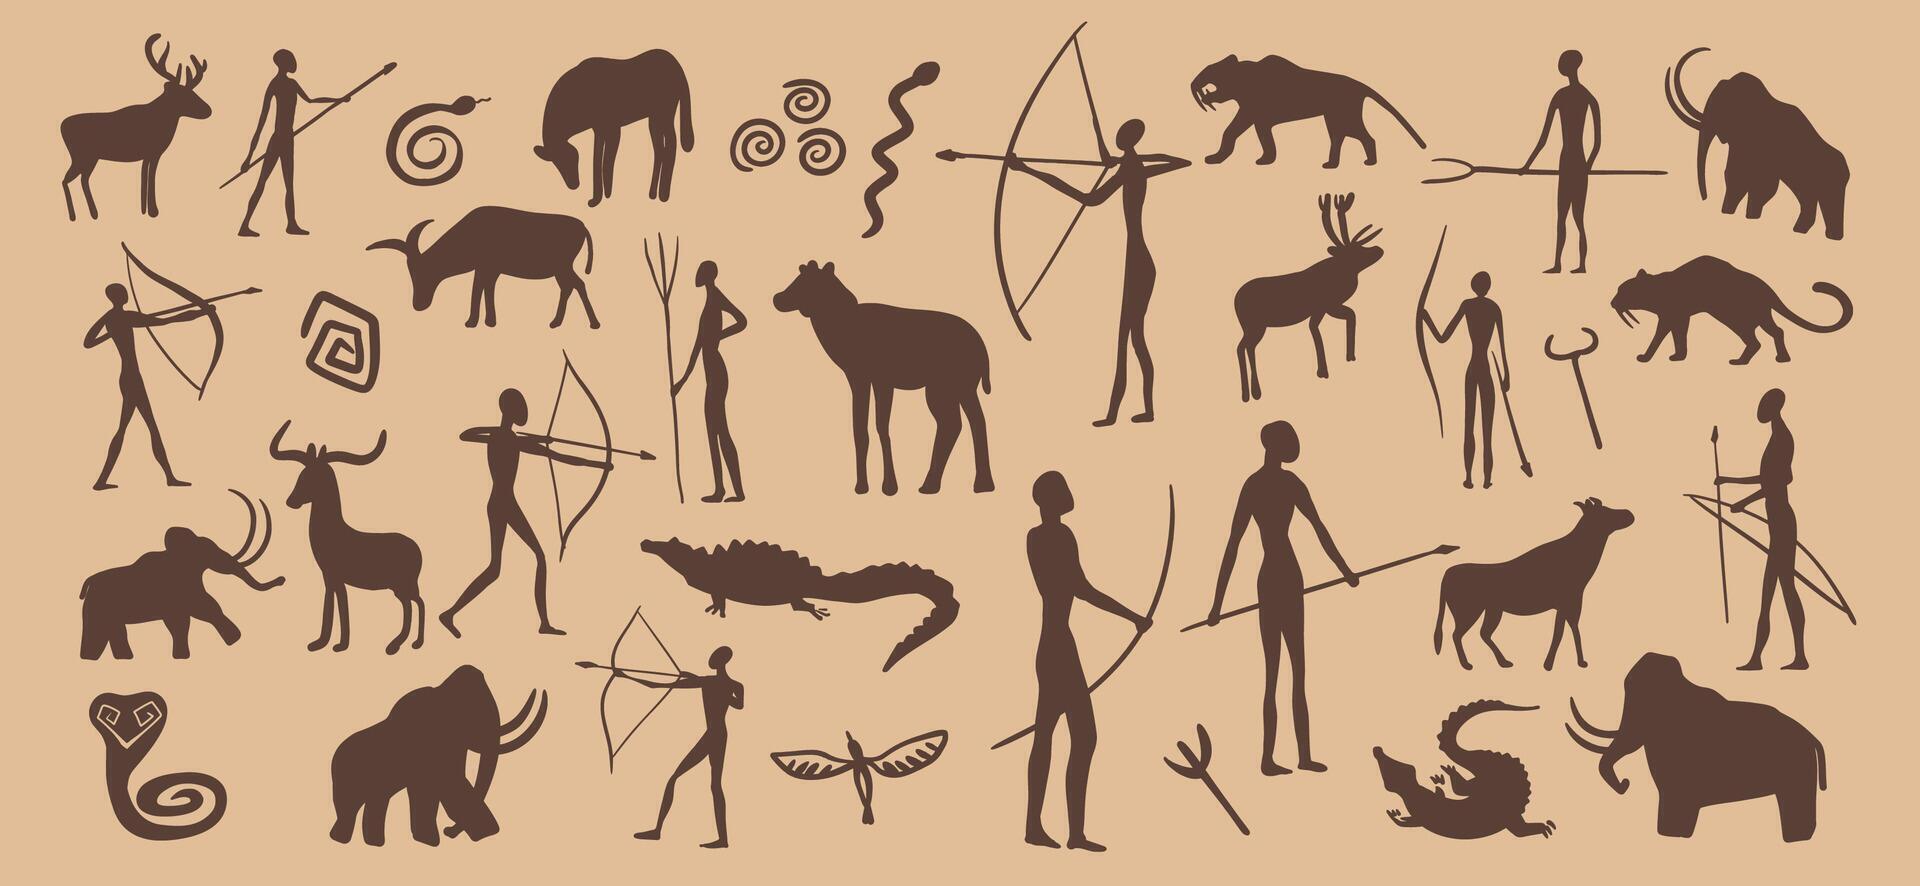 Prehistoric stone drawing, cave painting symbols vector